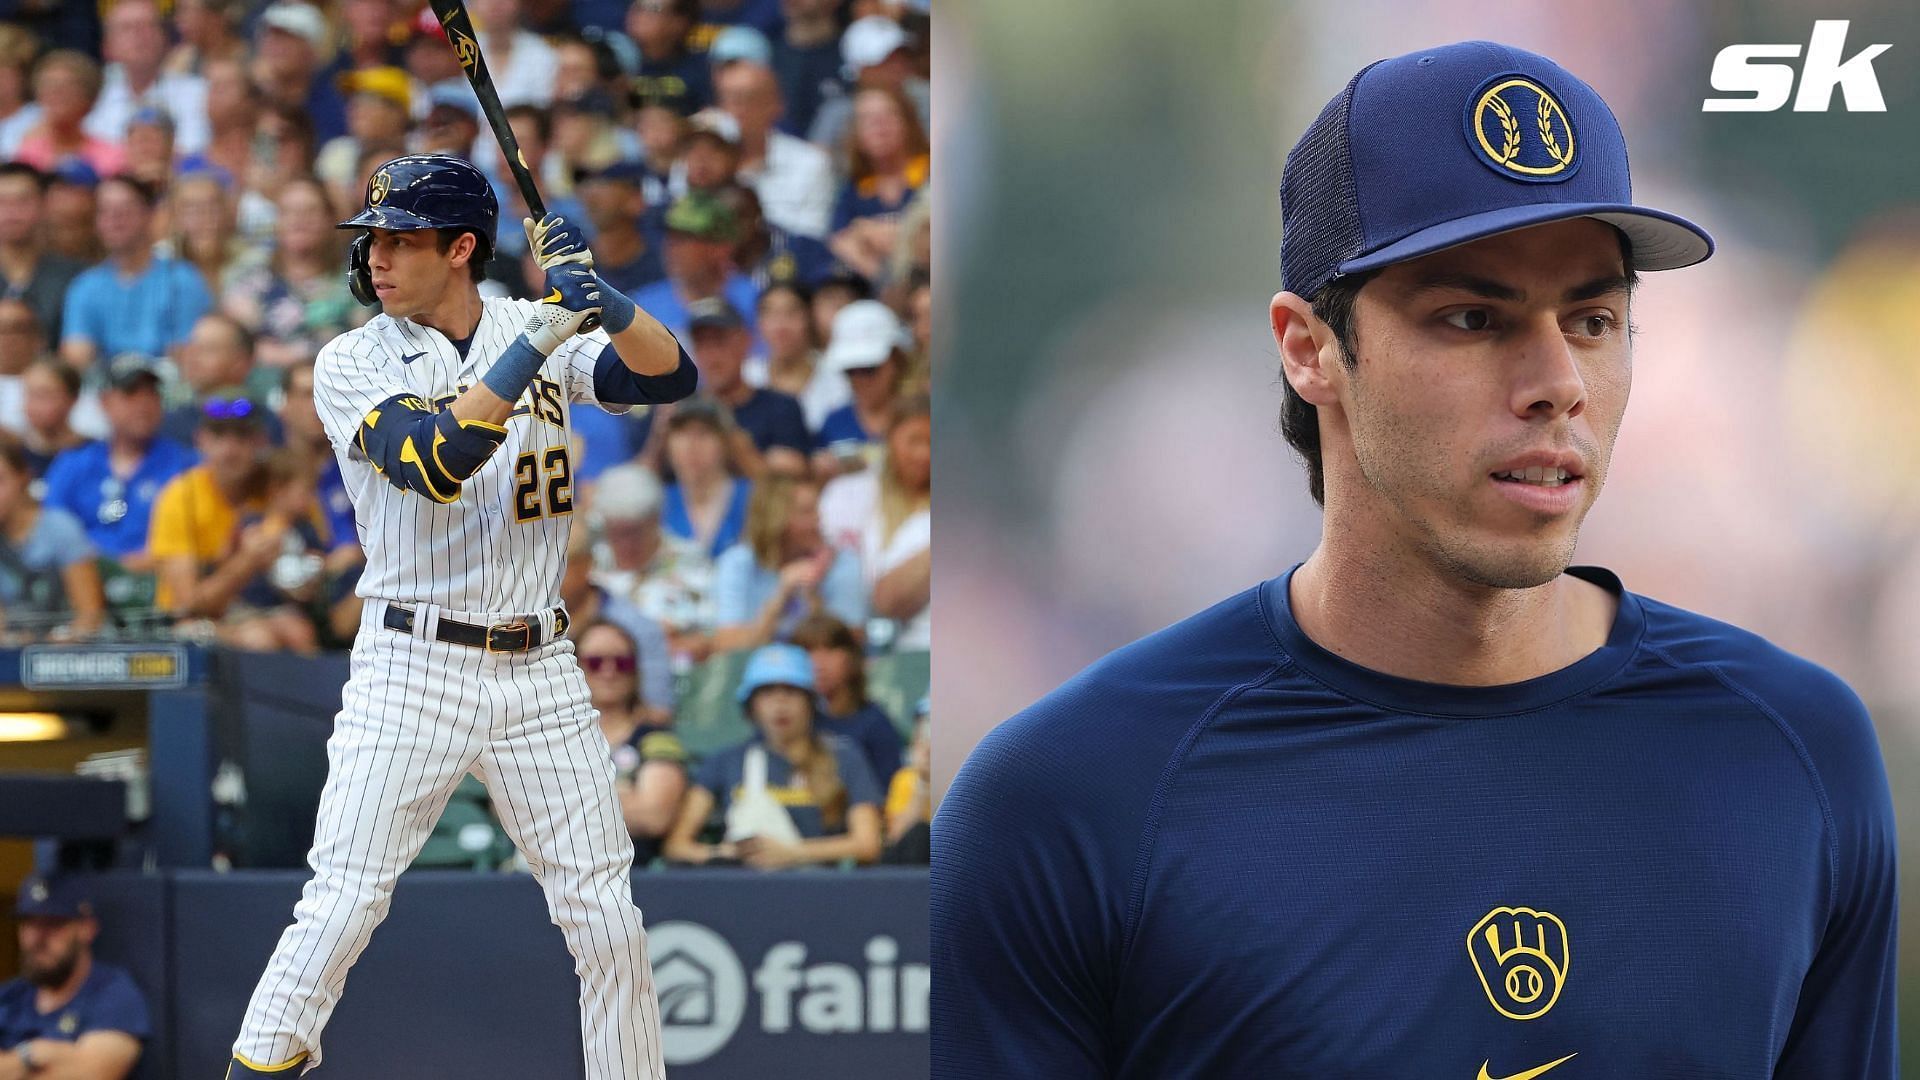 Christian Yelich should be in store for a strong season and worthy of a 5th round pick in 2024 fantasy baseball drafts